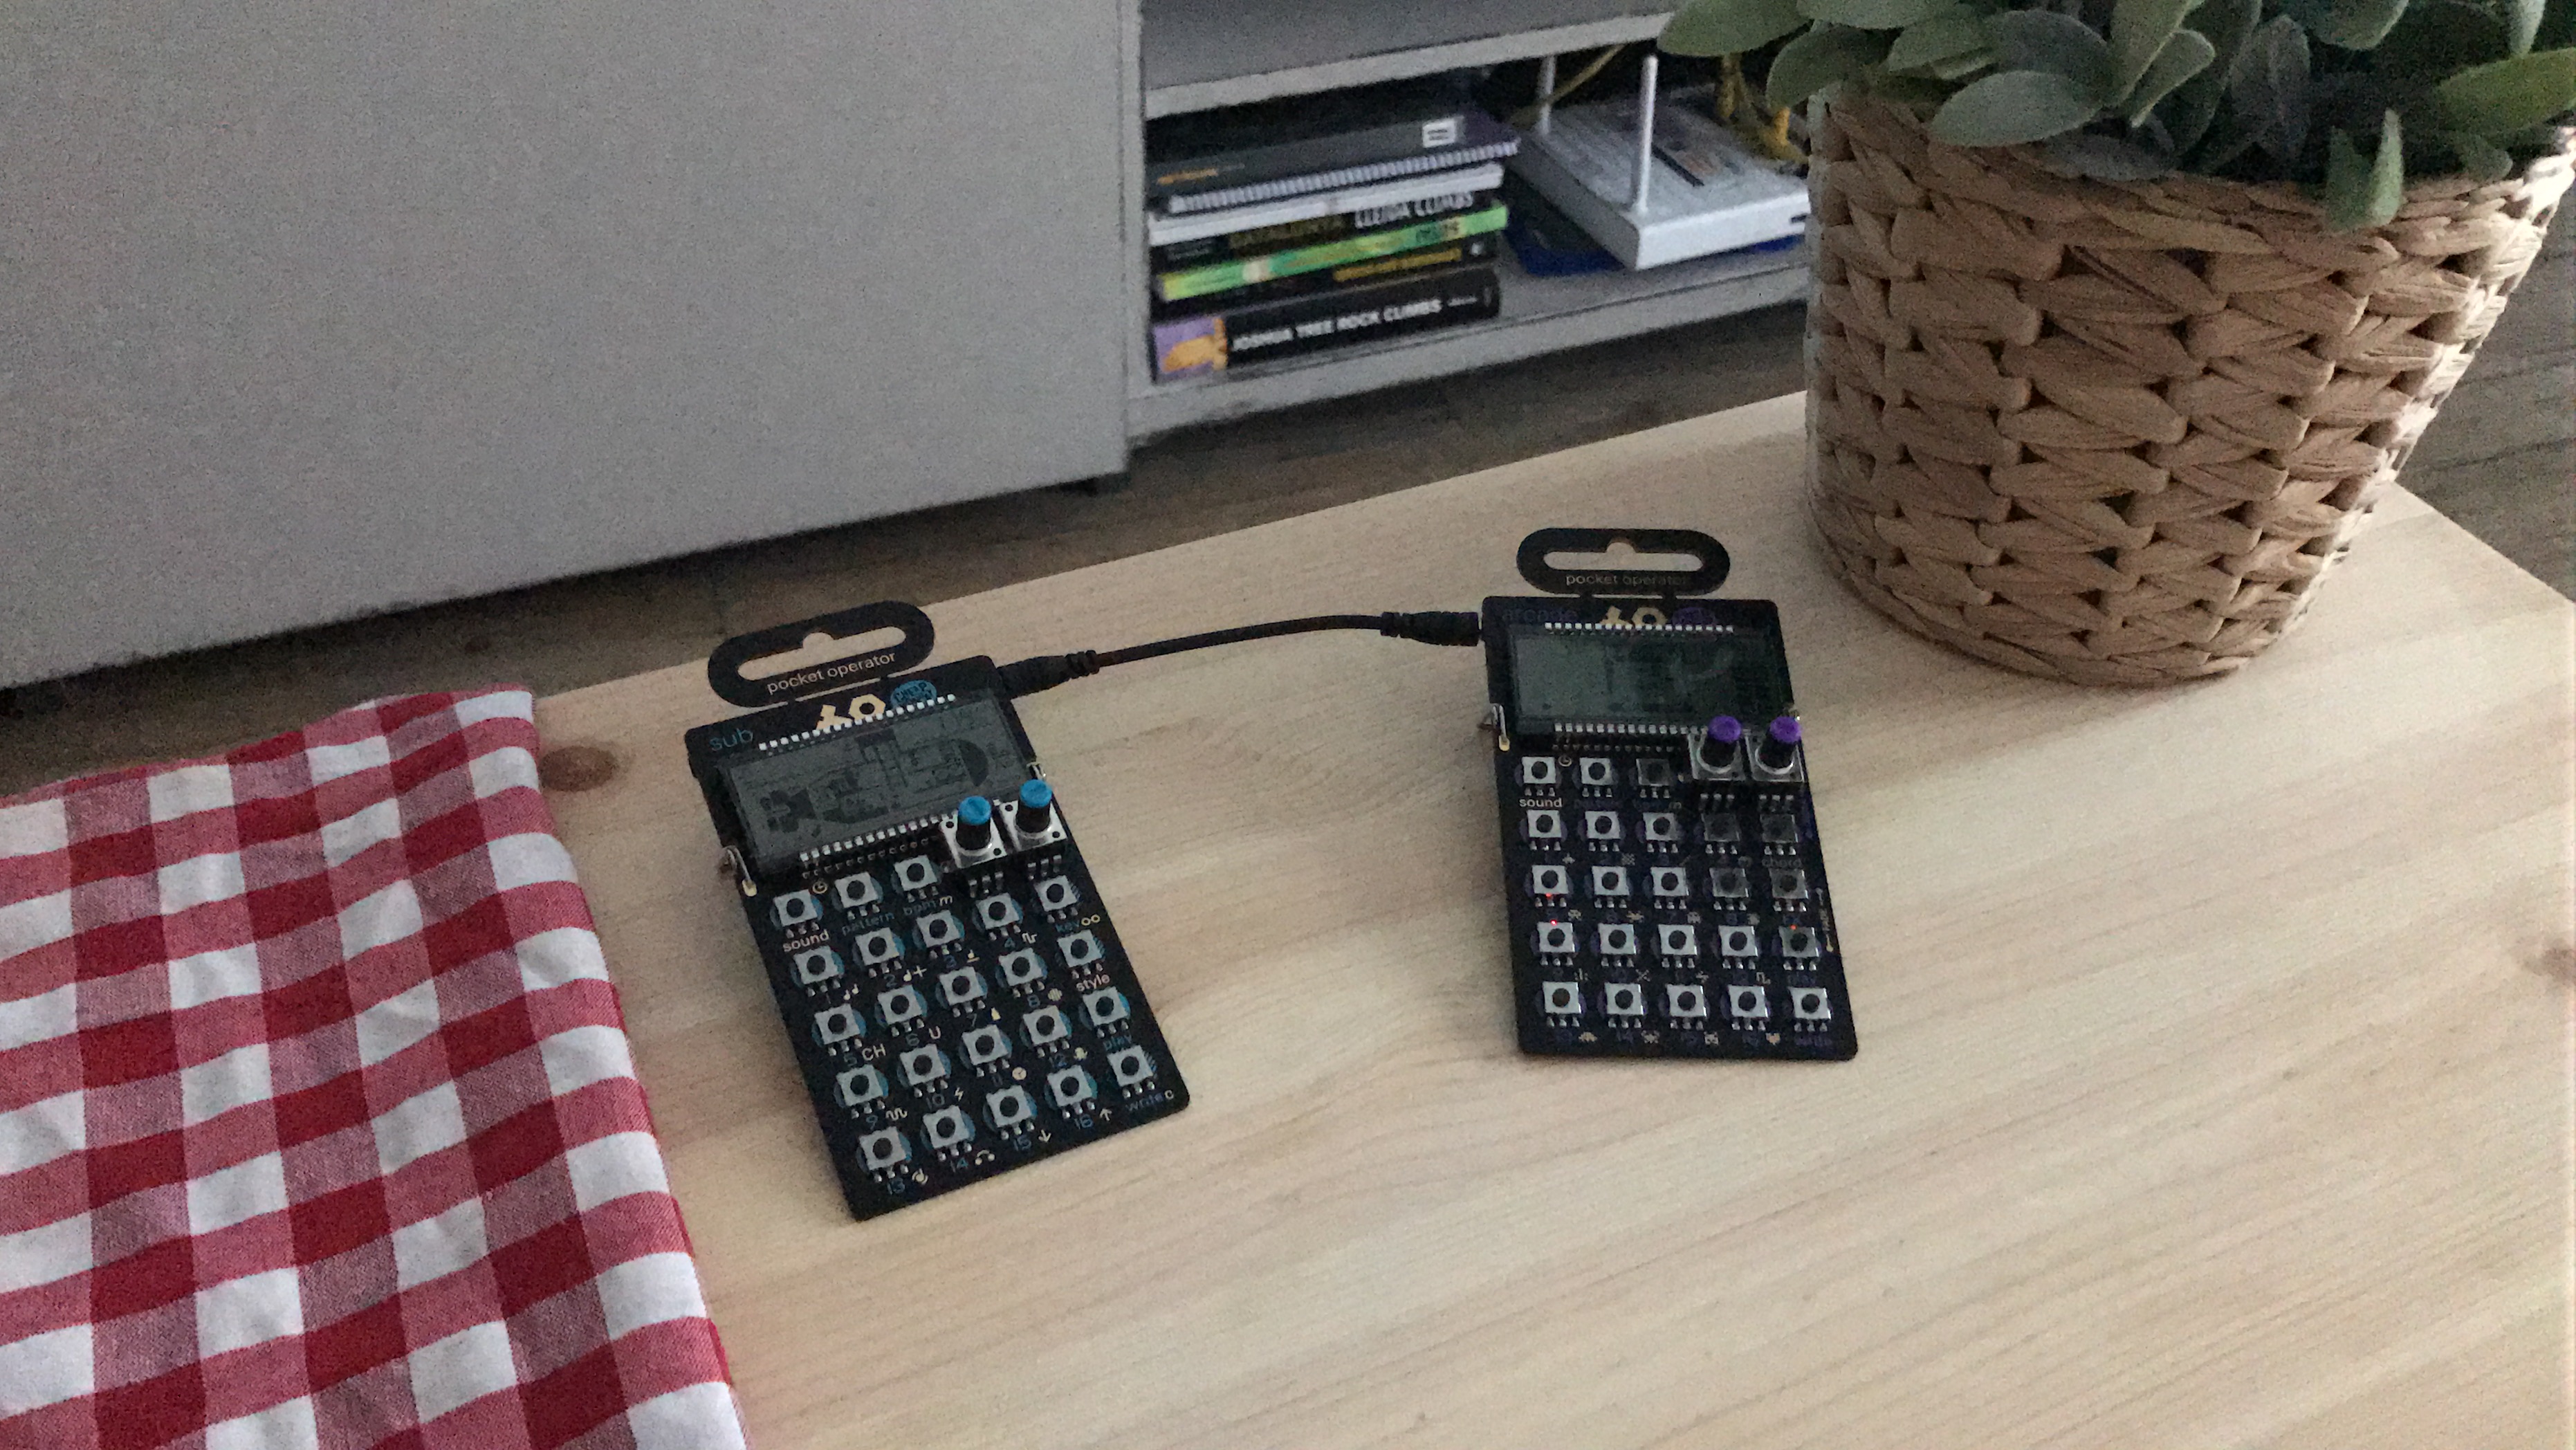 The PO-12 and PO-10